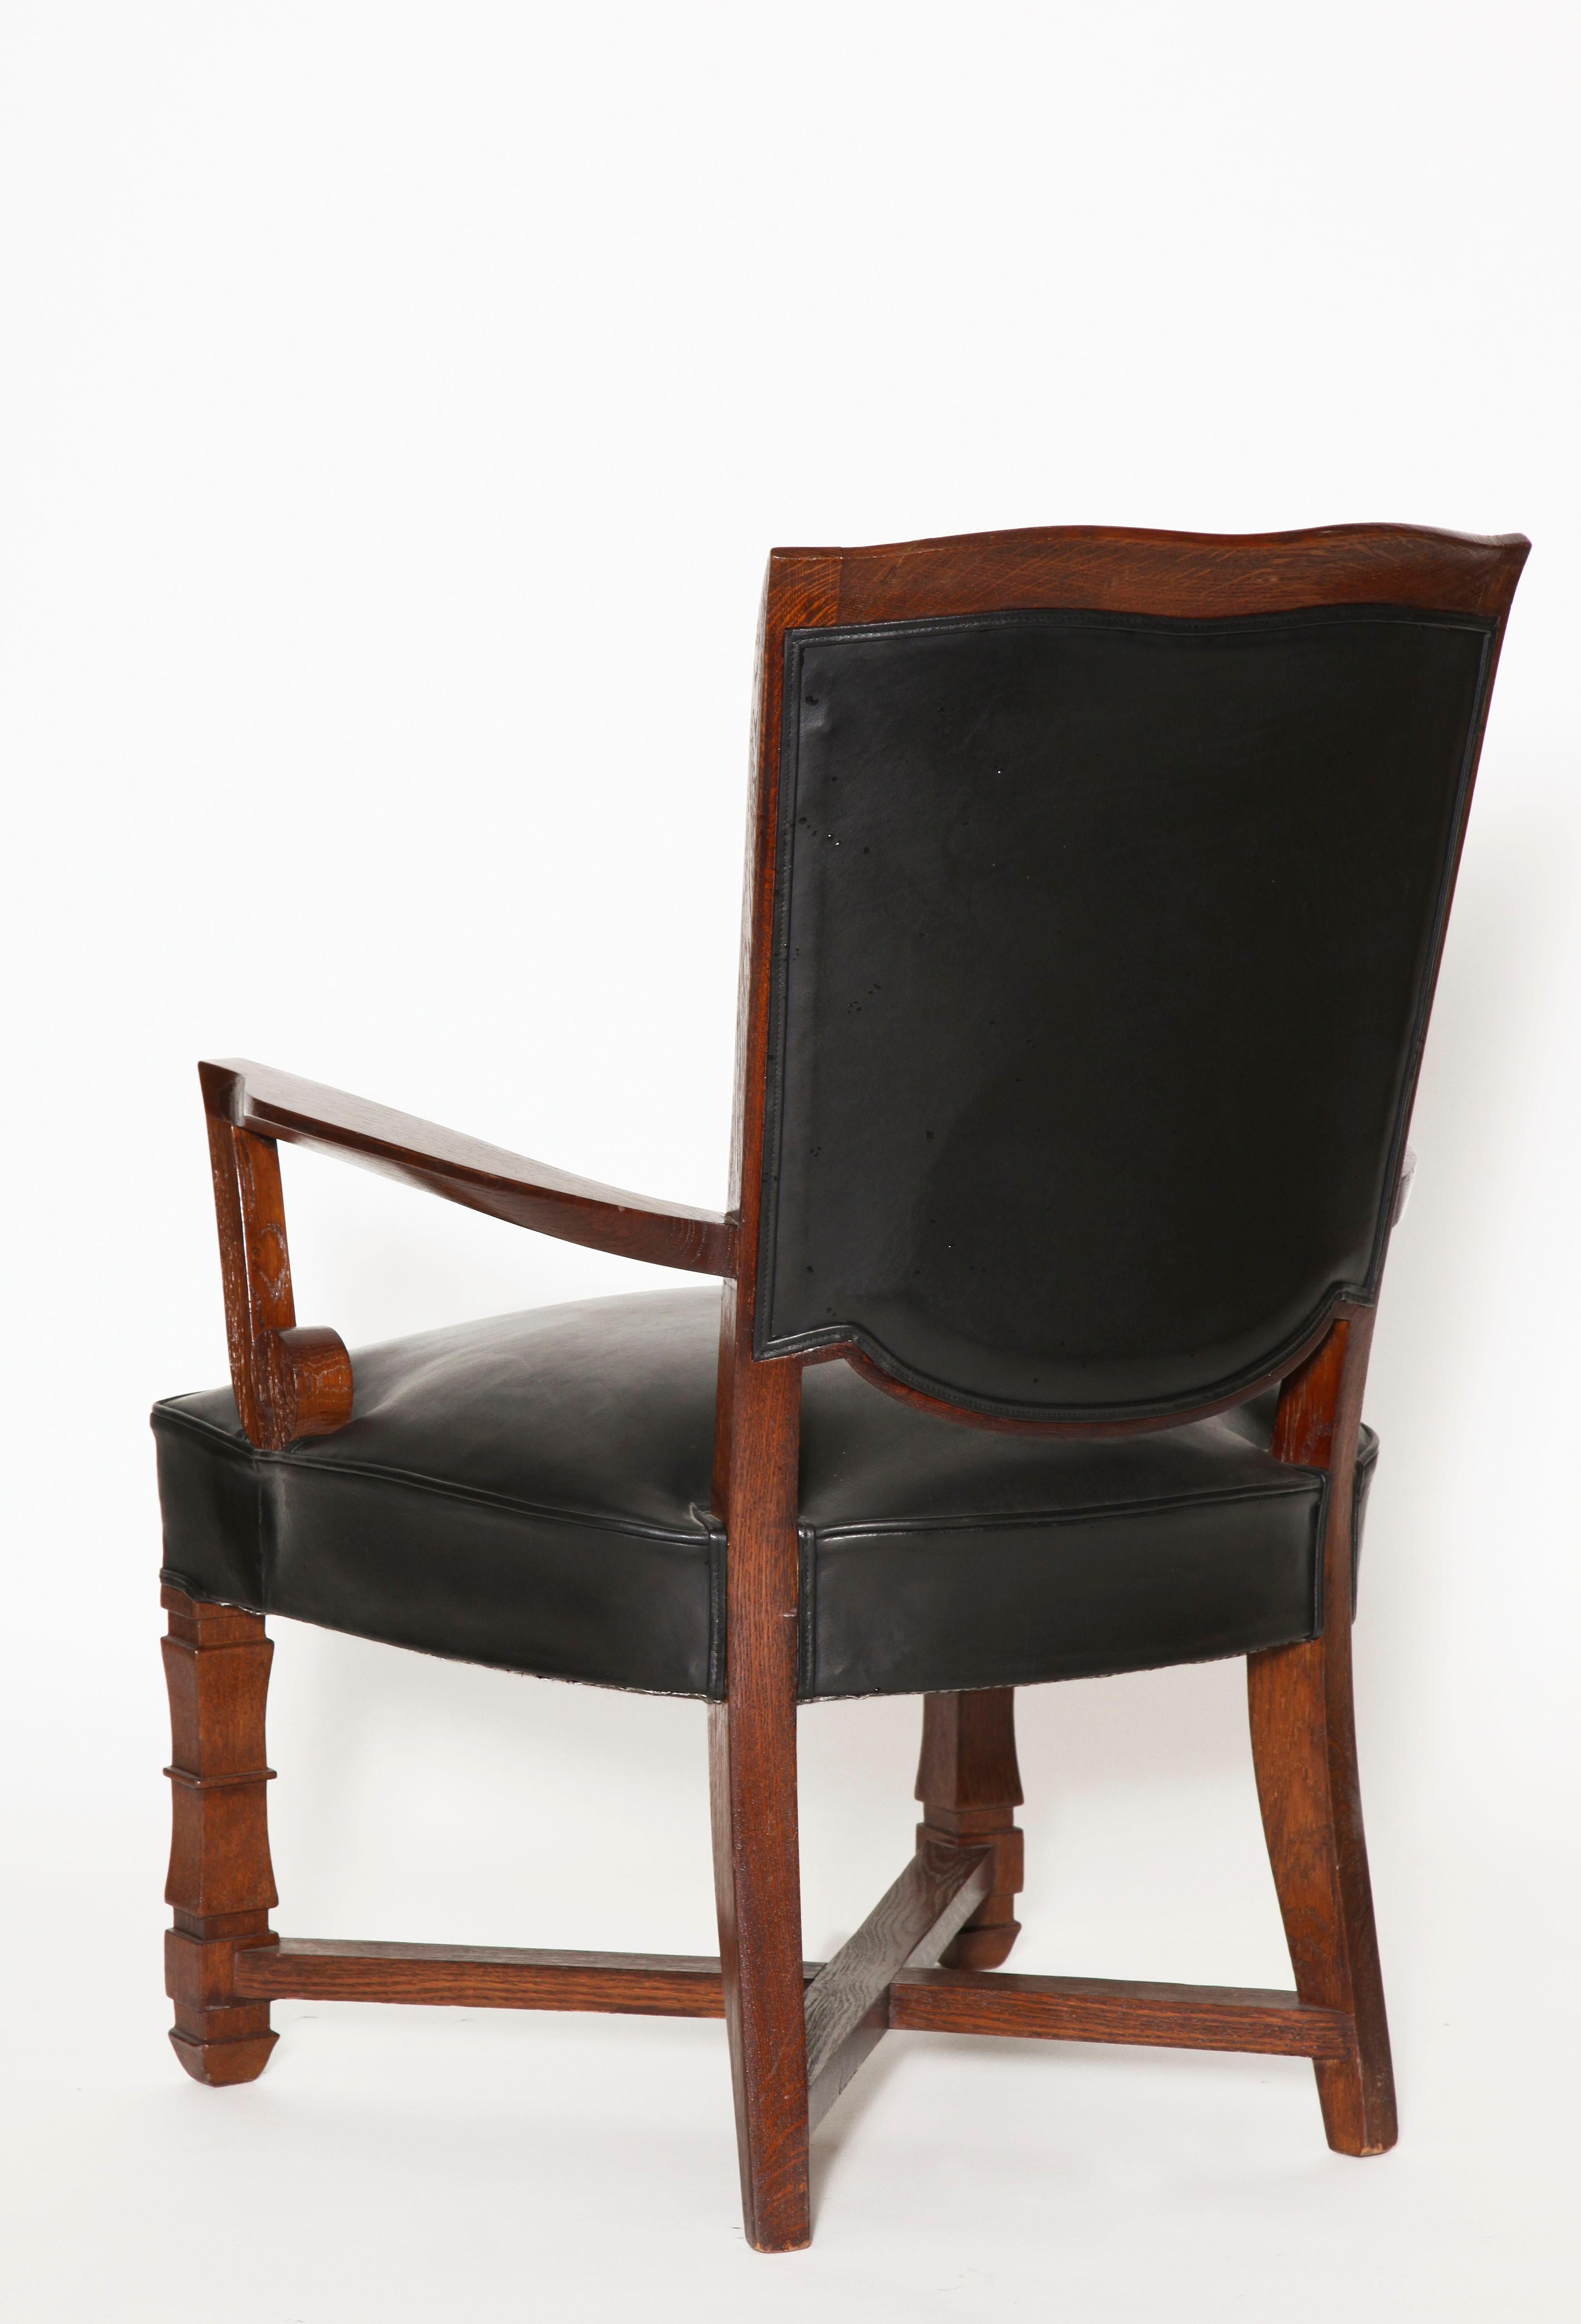 Mid-20th Century Jules Leleu, Mahogany and Leather Armchair, France, circa 1945 For Sale